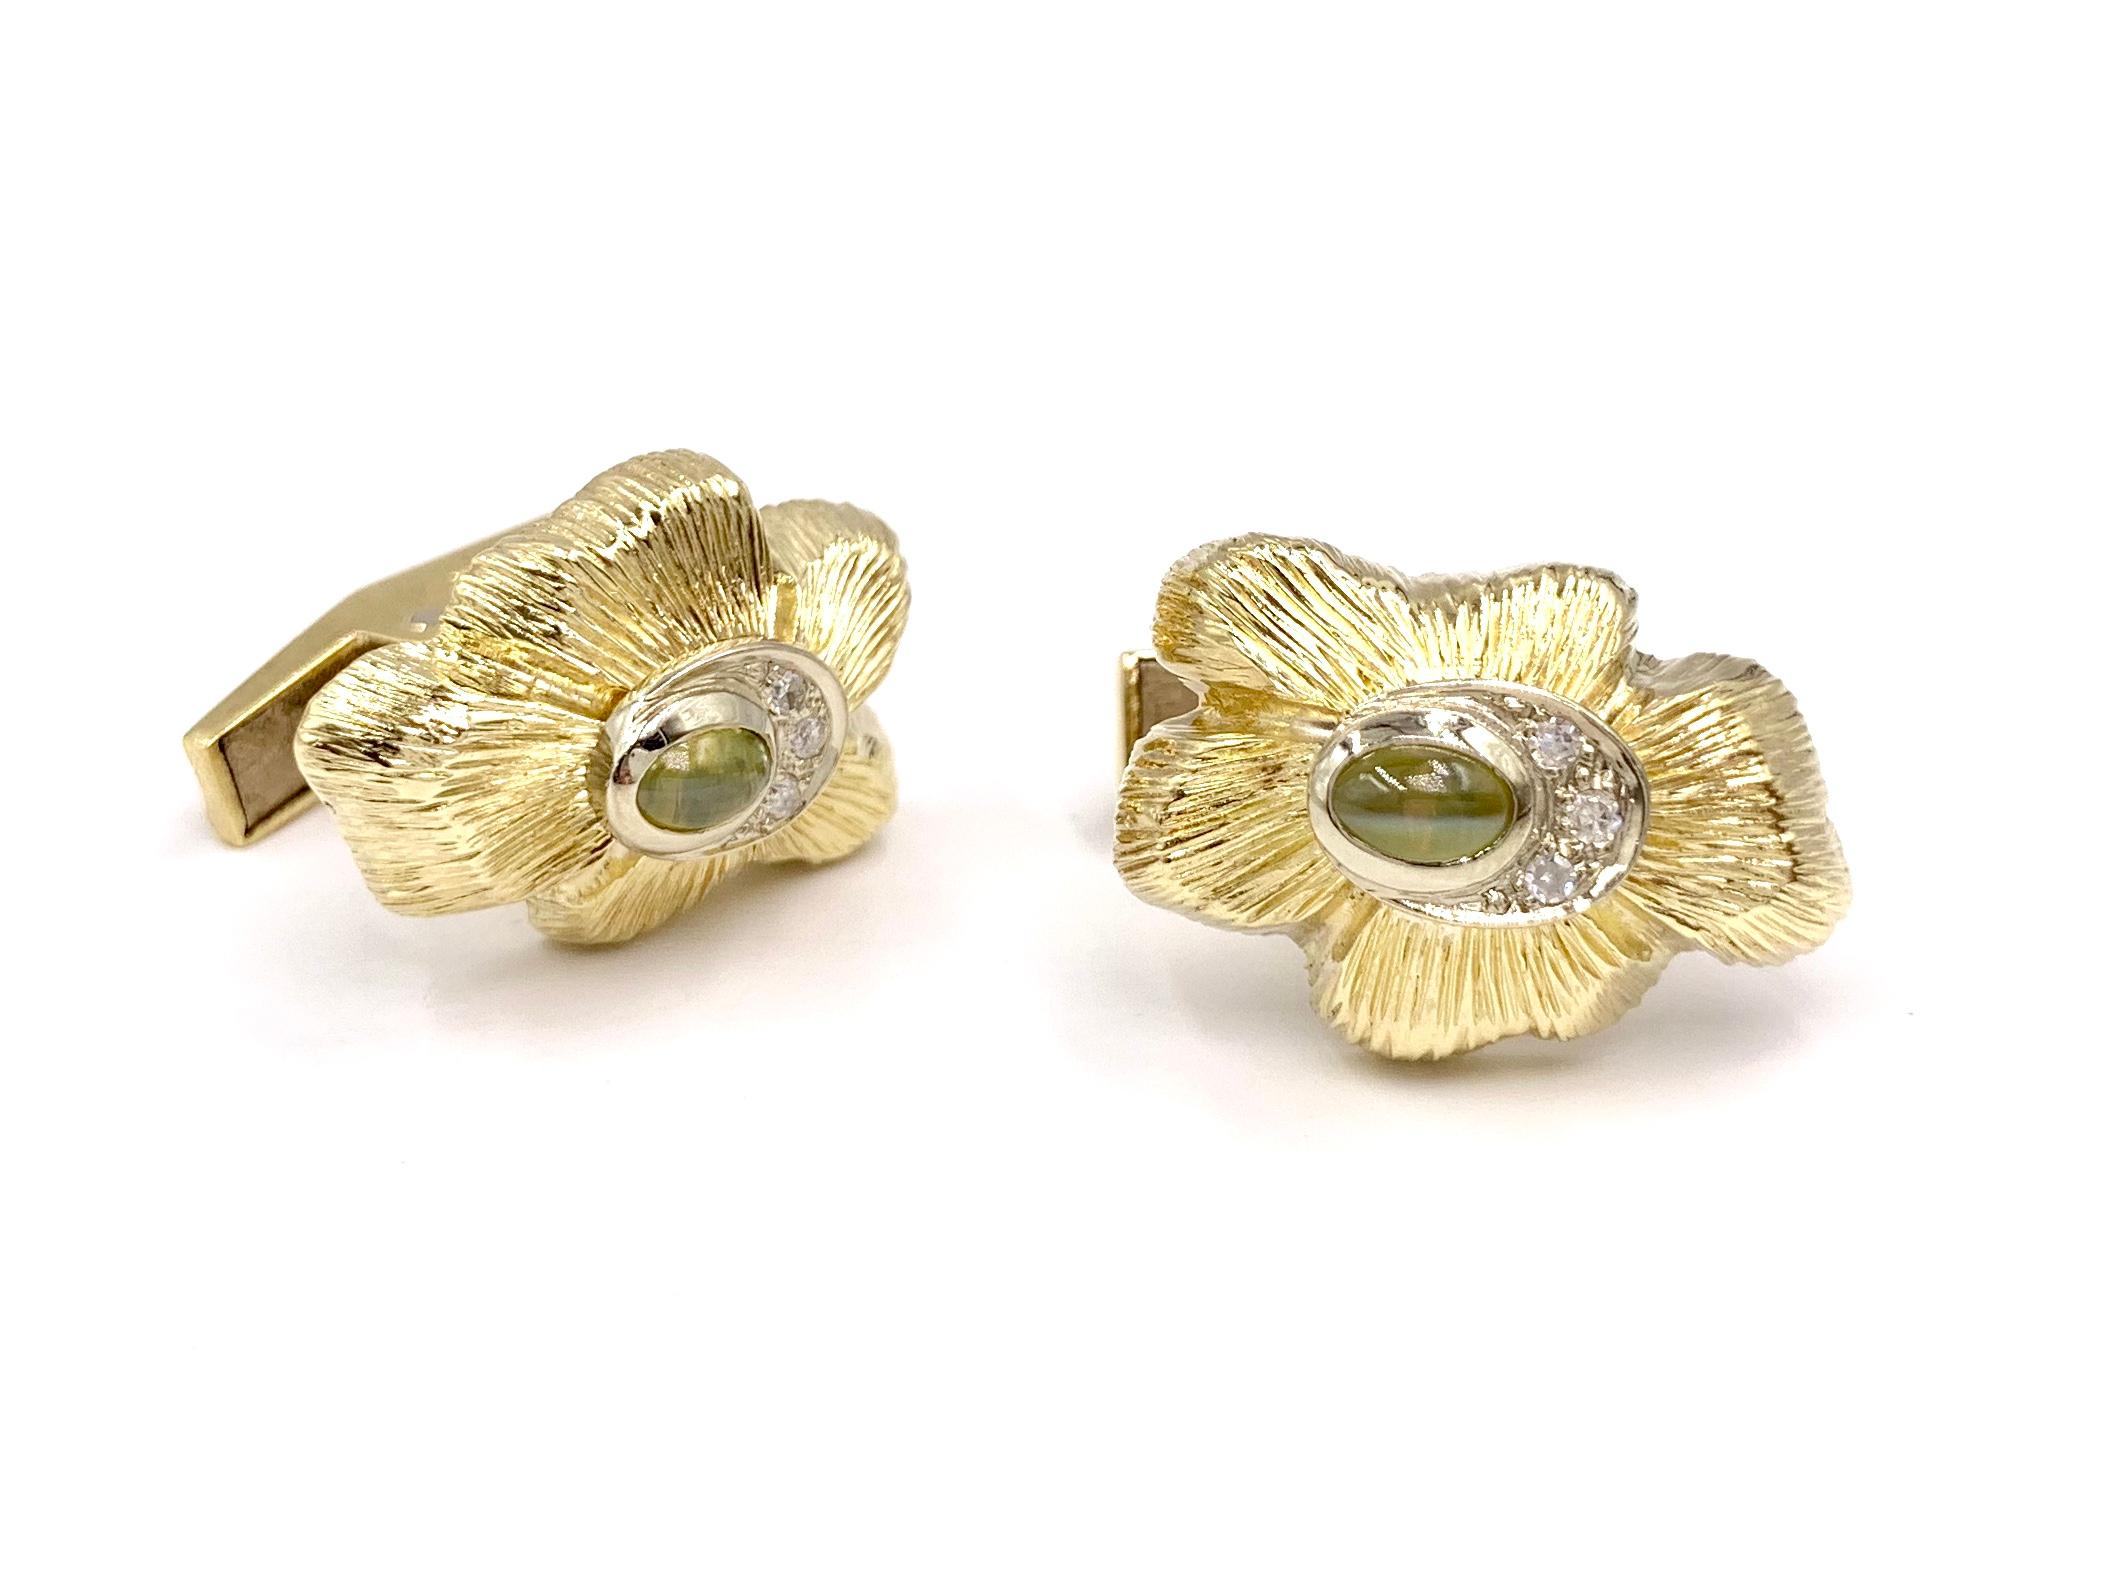 Yellow Gold Vintage Cufflinks with Diamonds and Cat's Eye Gemstones In Good Condition For Sale In Pikesville, MD